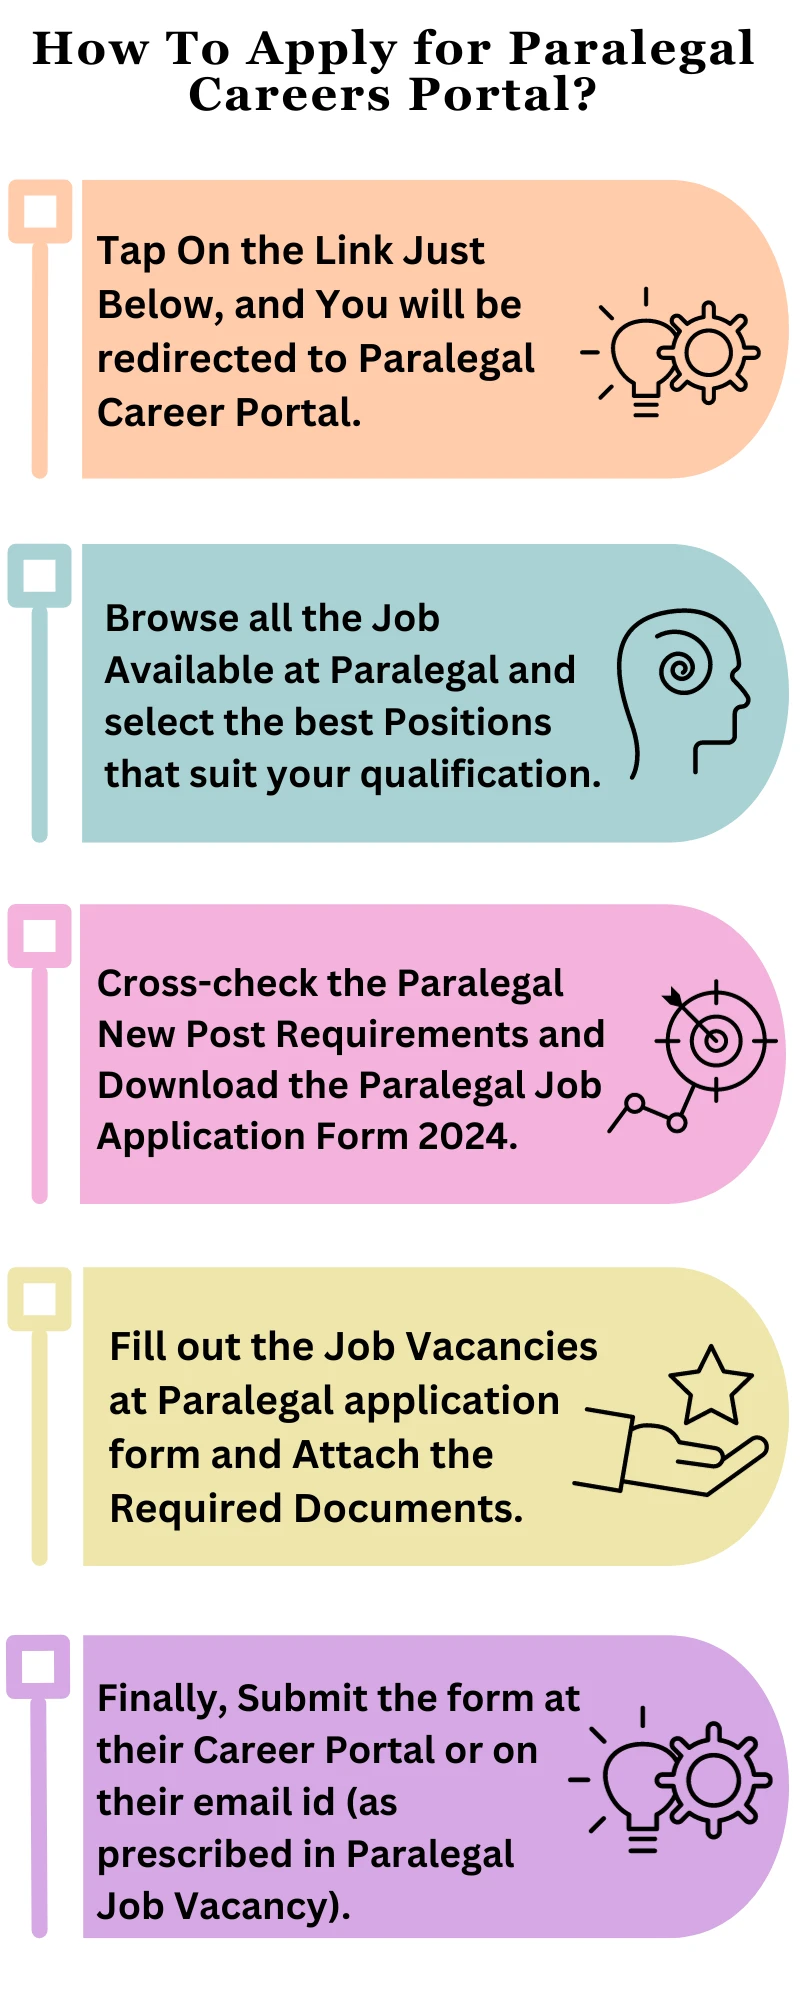 How To Apply for Paralegal Careers Portal?